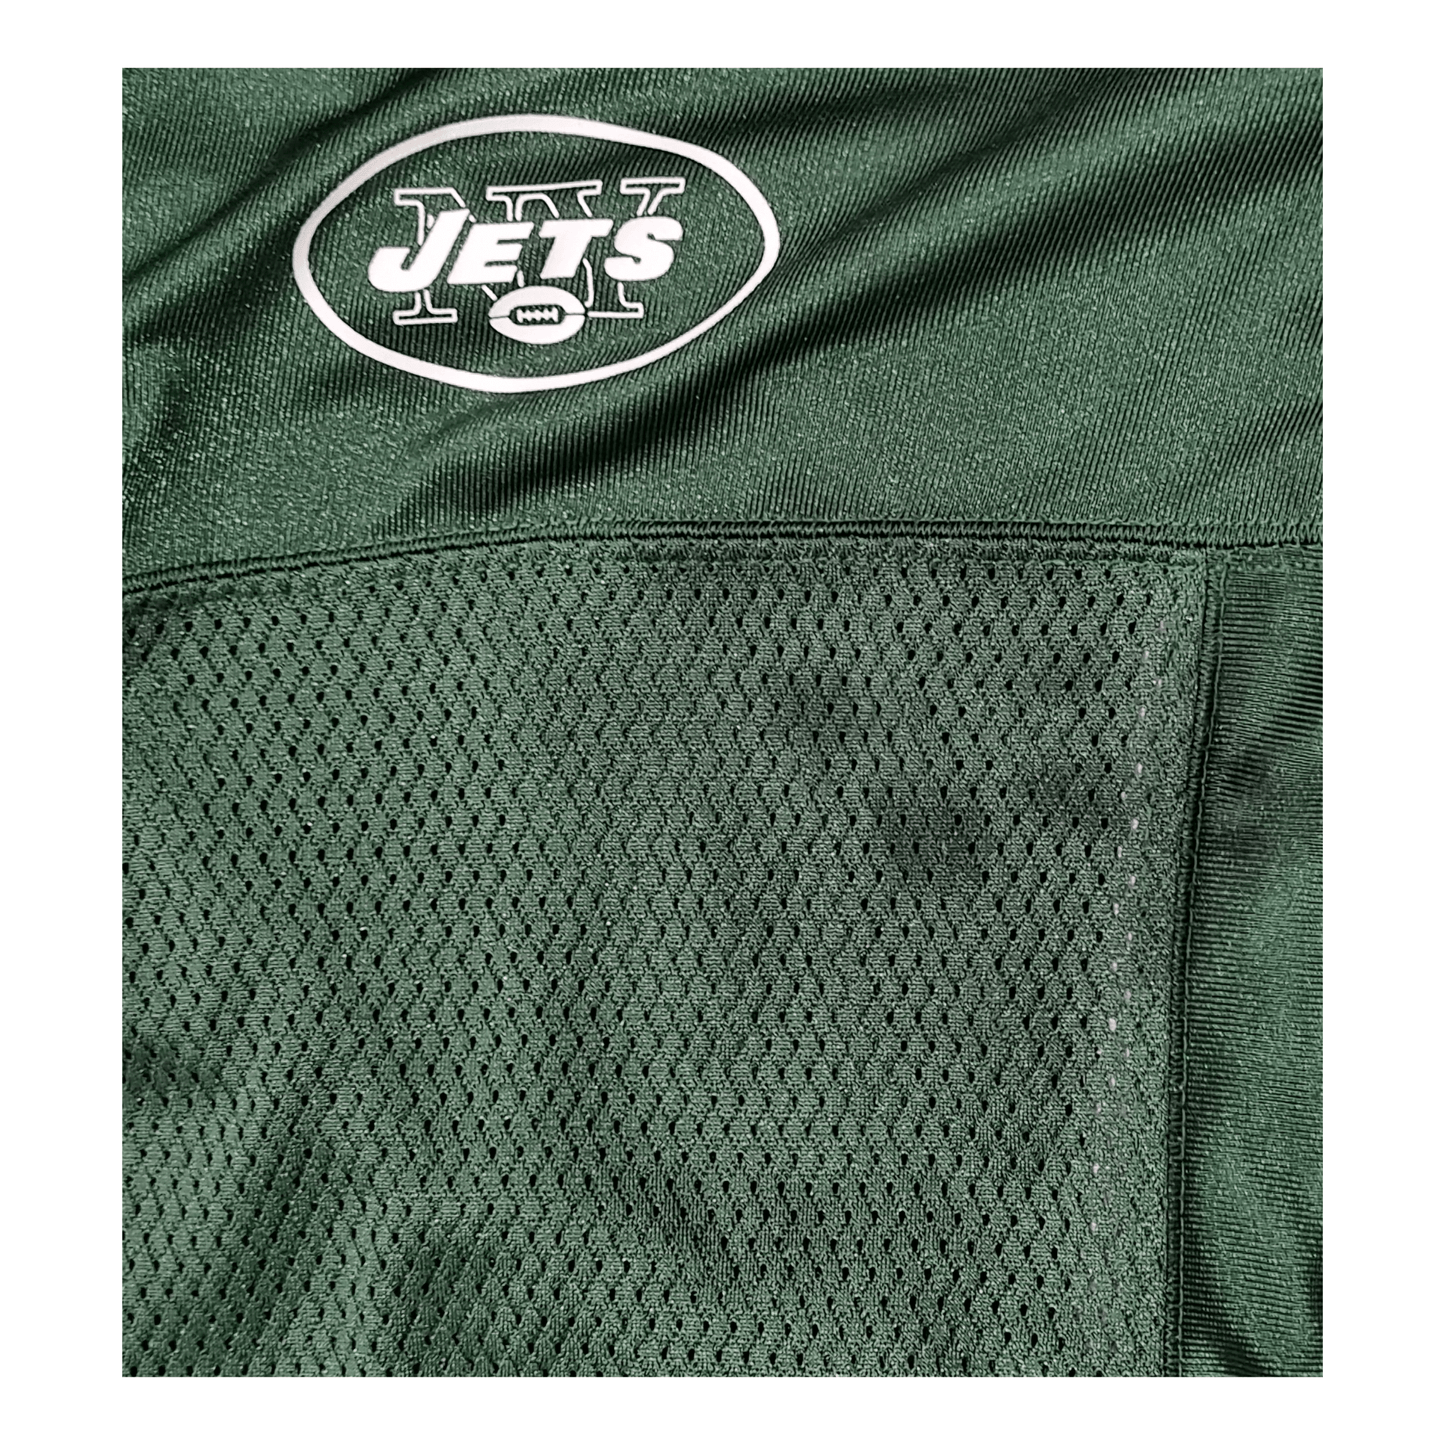 New York Jets Jersey - Tag